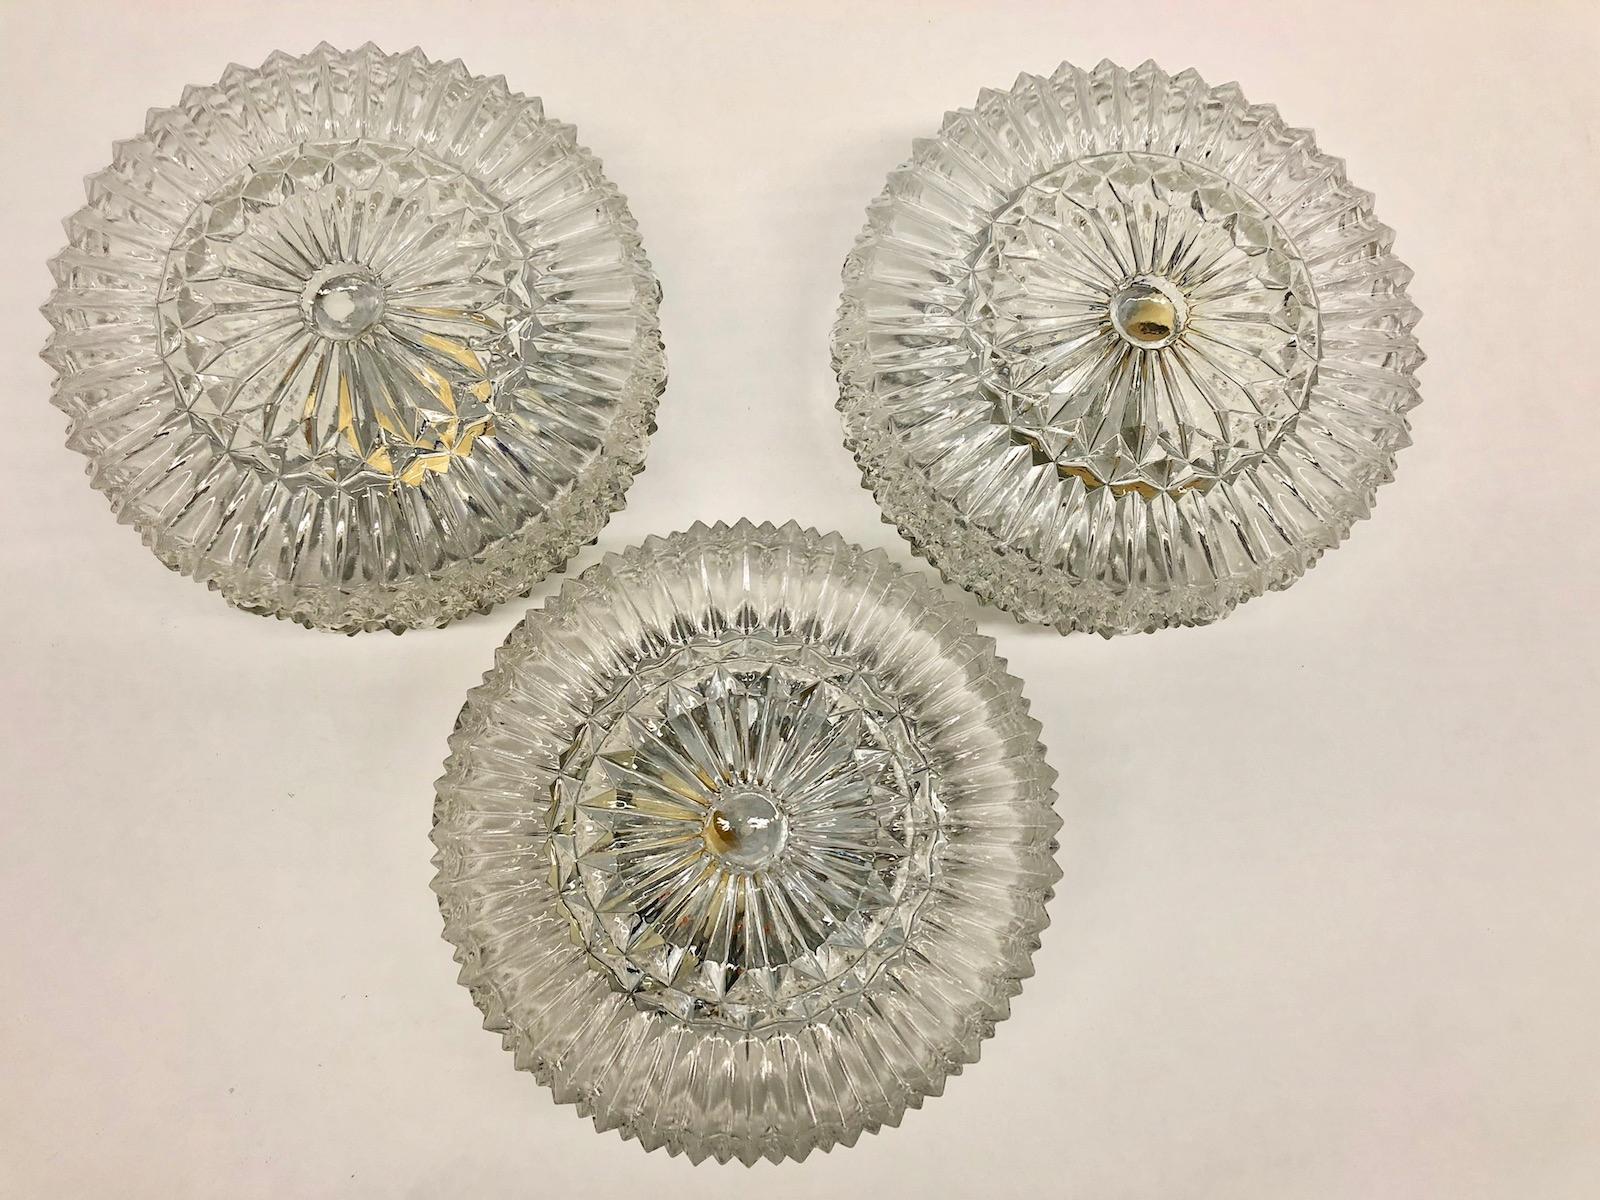 Three beautiful flush mount. Made in Italy. Gorgeous textured glass Flush mount with metal fixture. Each fixture requires one European E27 Edison or medium bulb up to 60 watts.